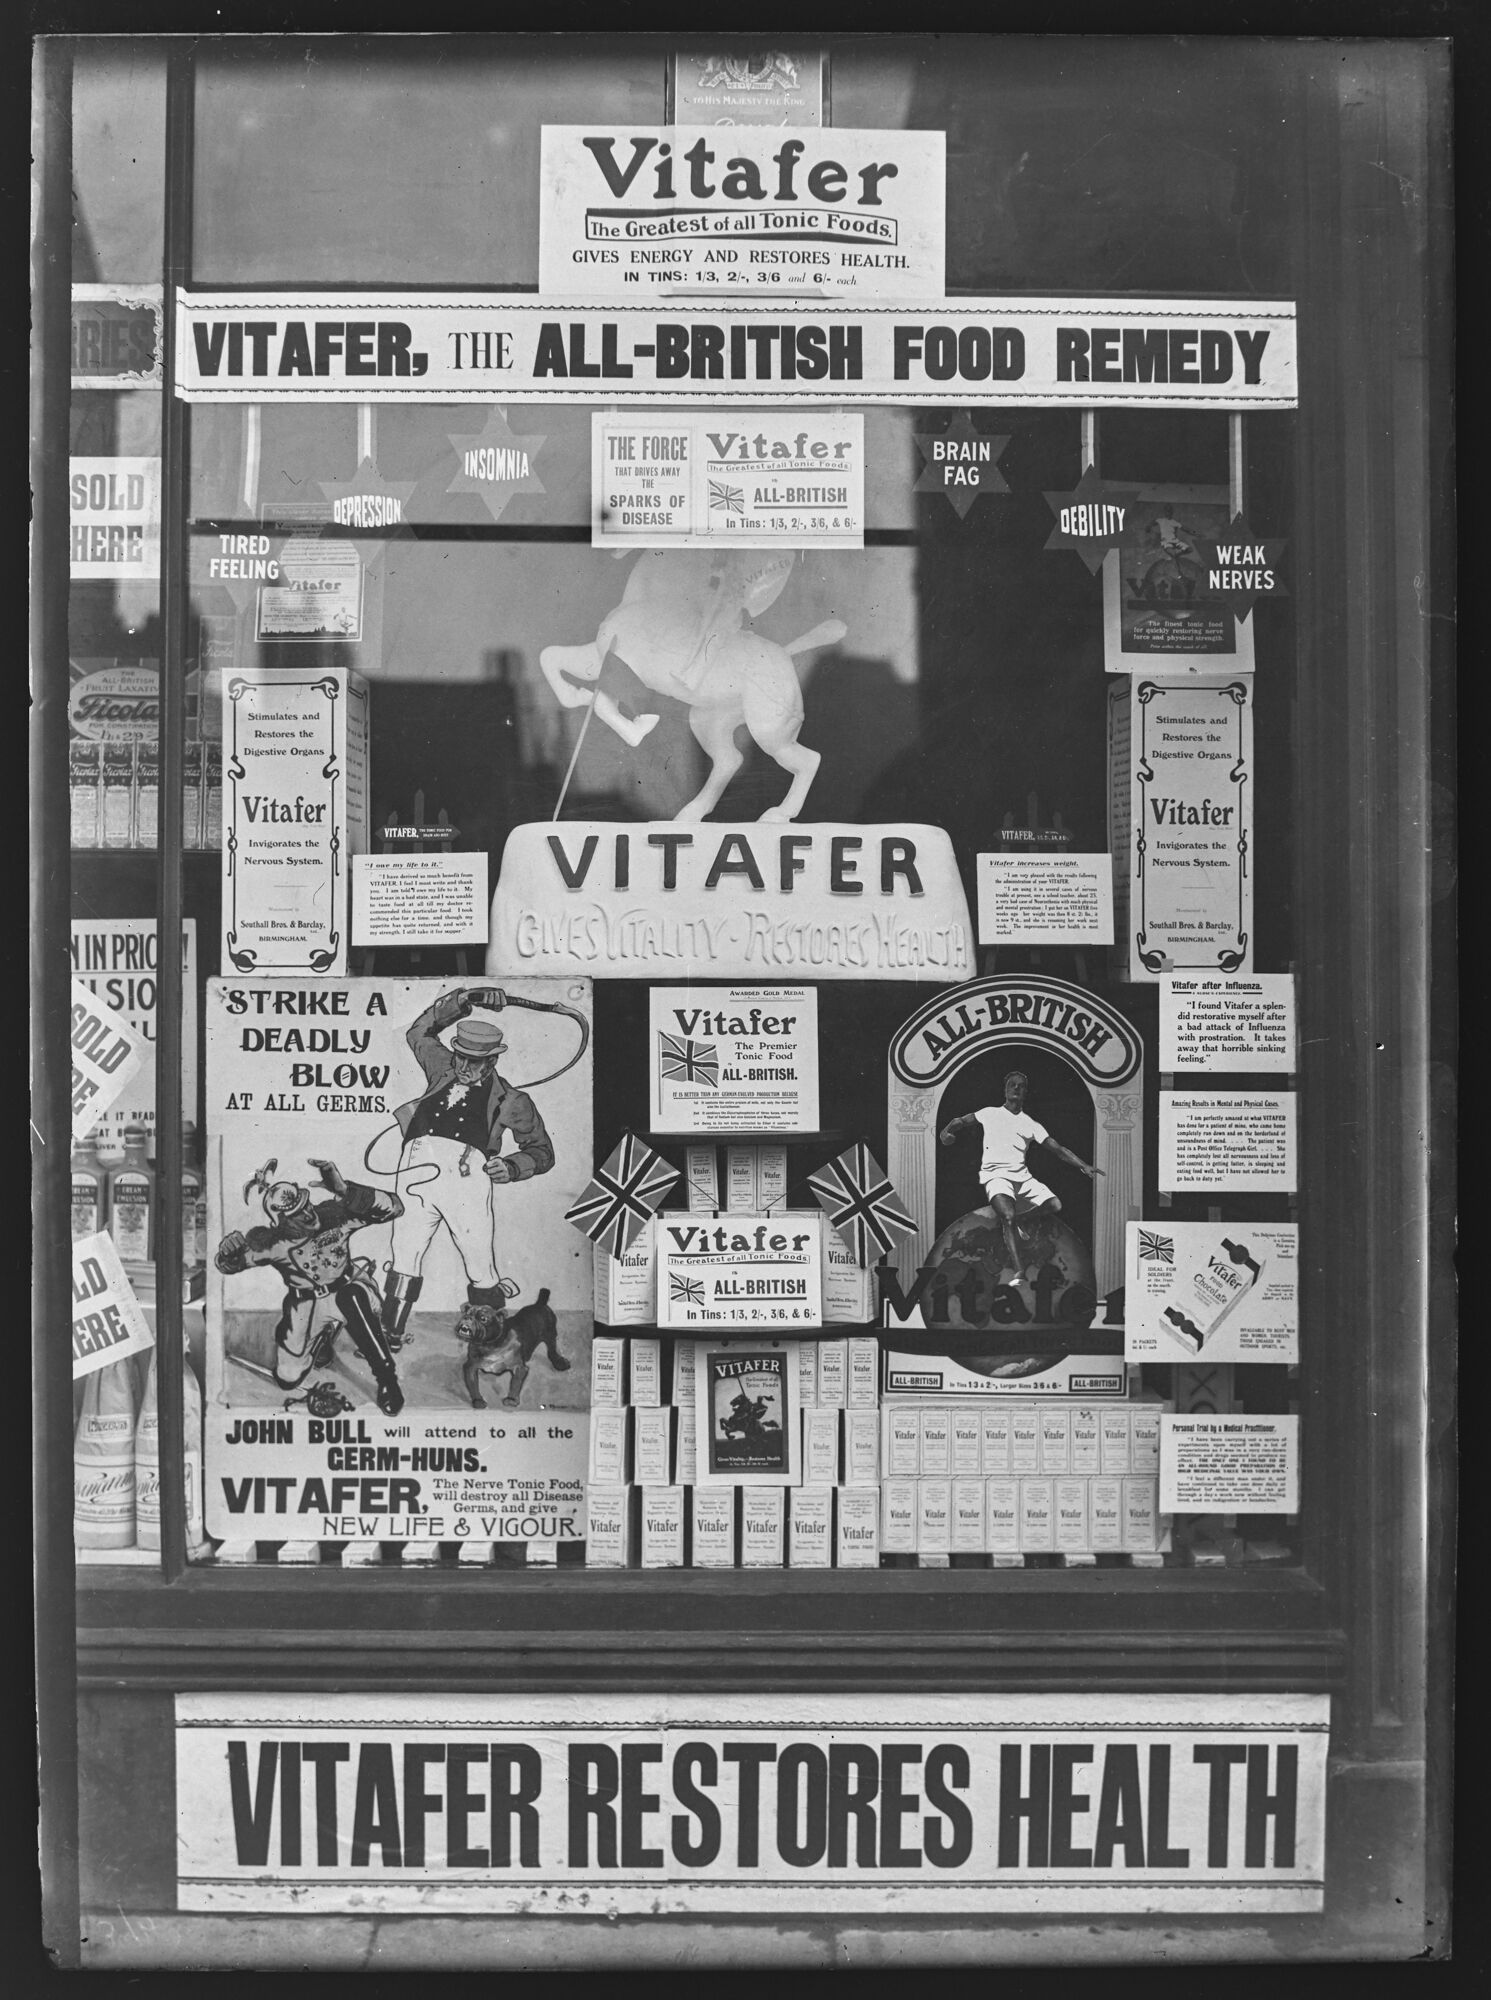 Window display for Vitafer, location unknown